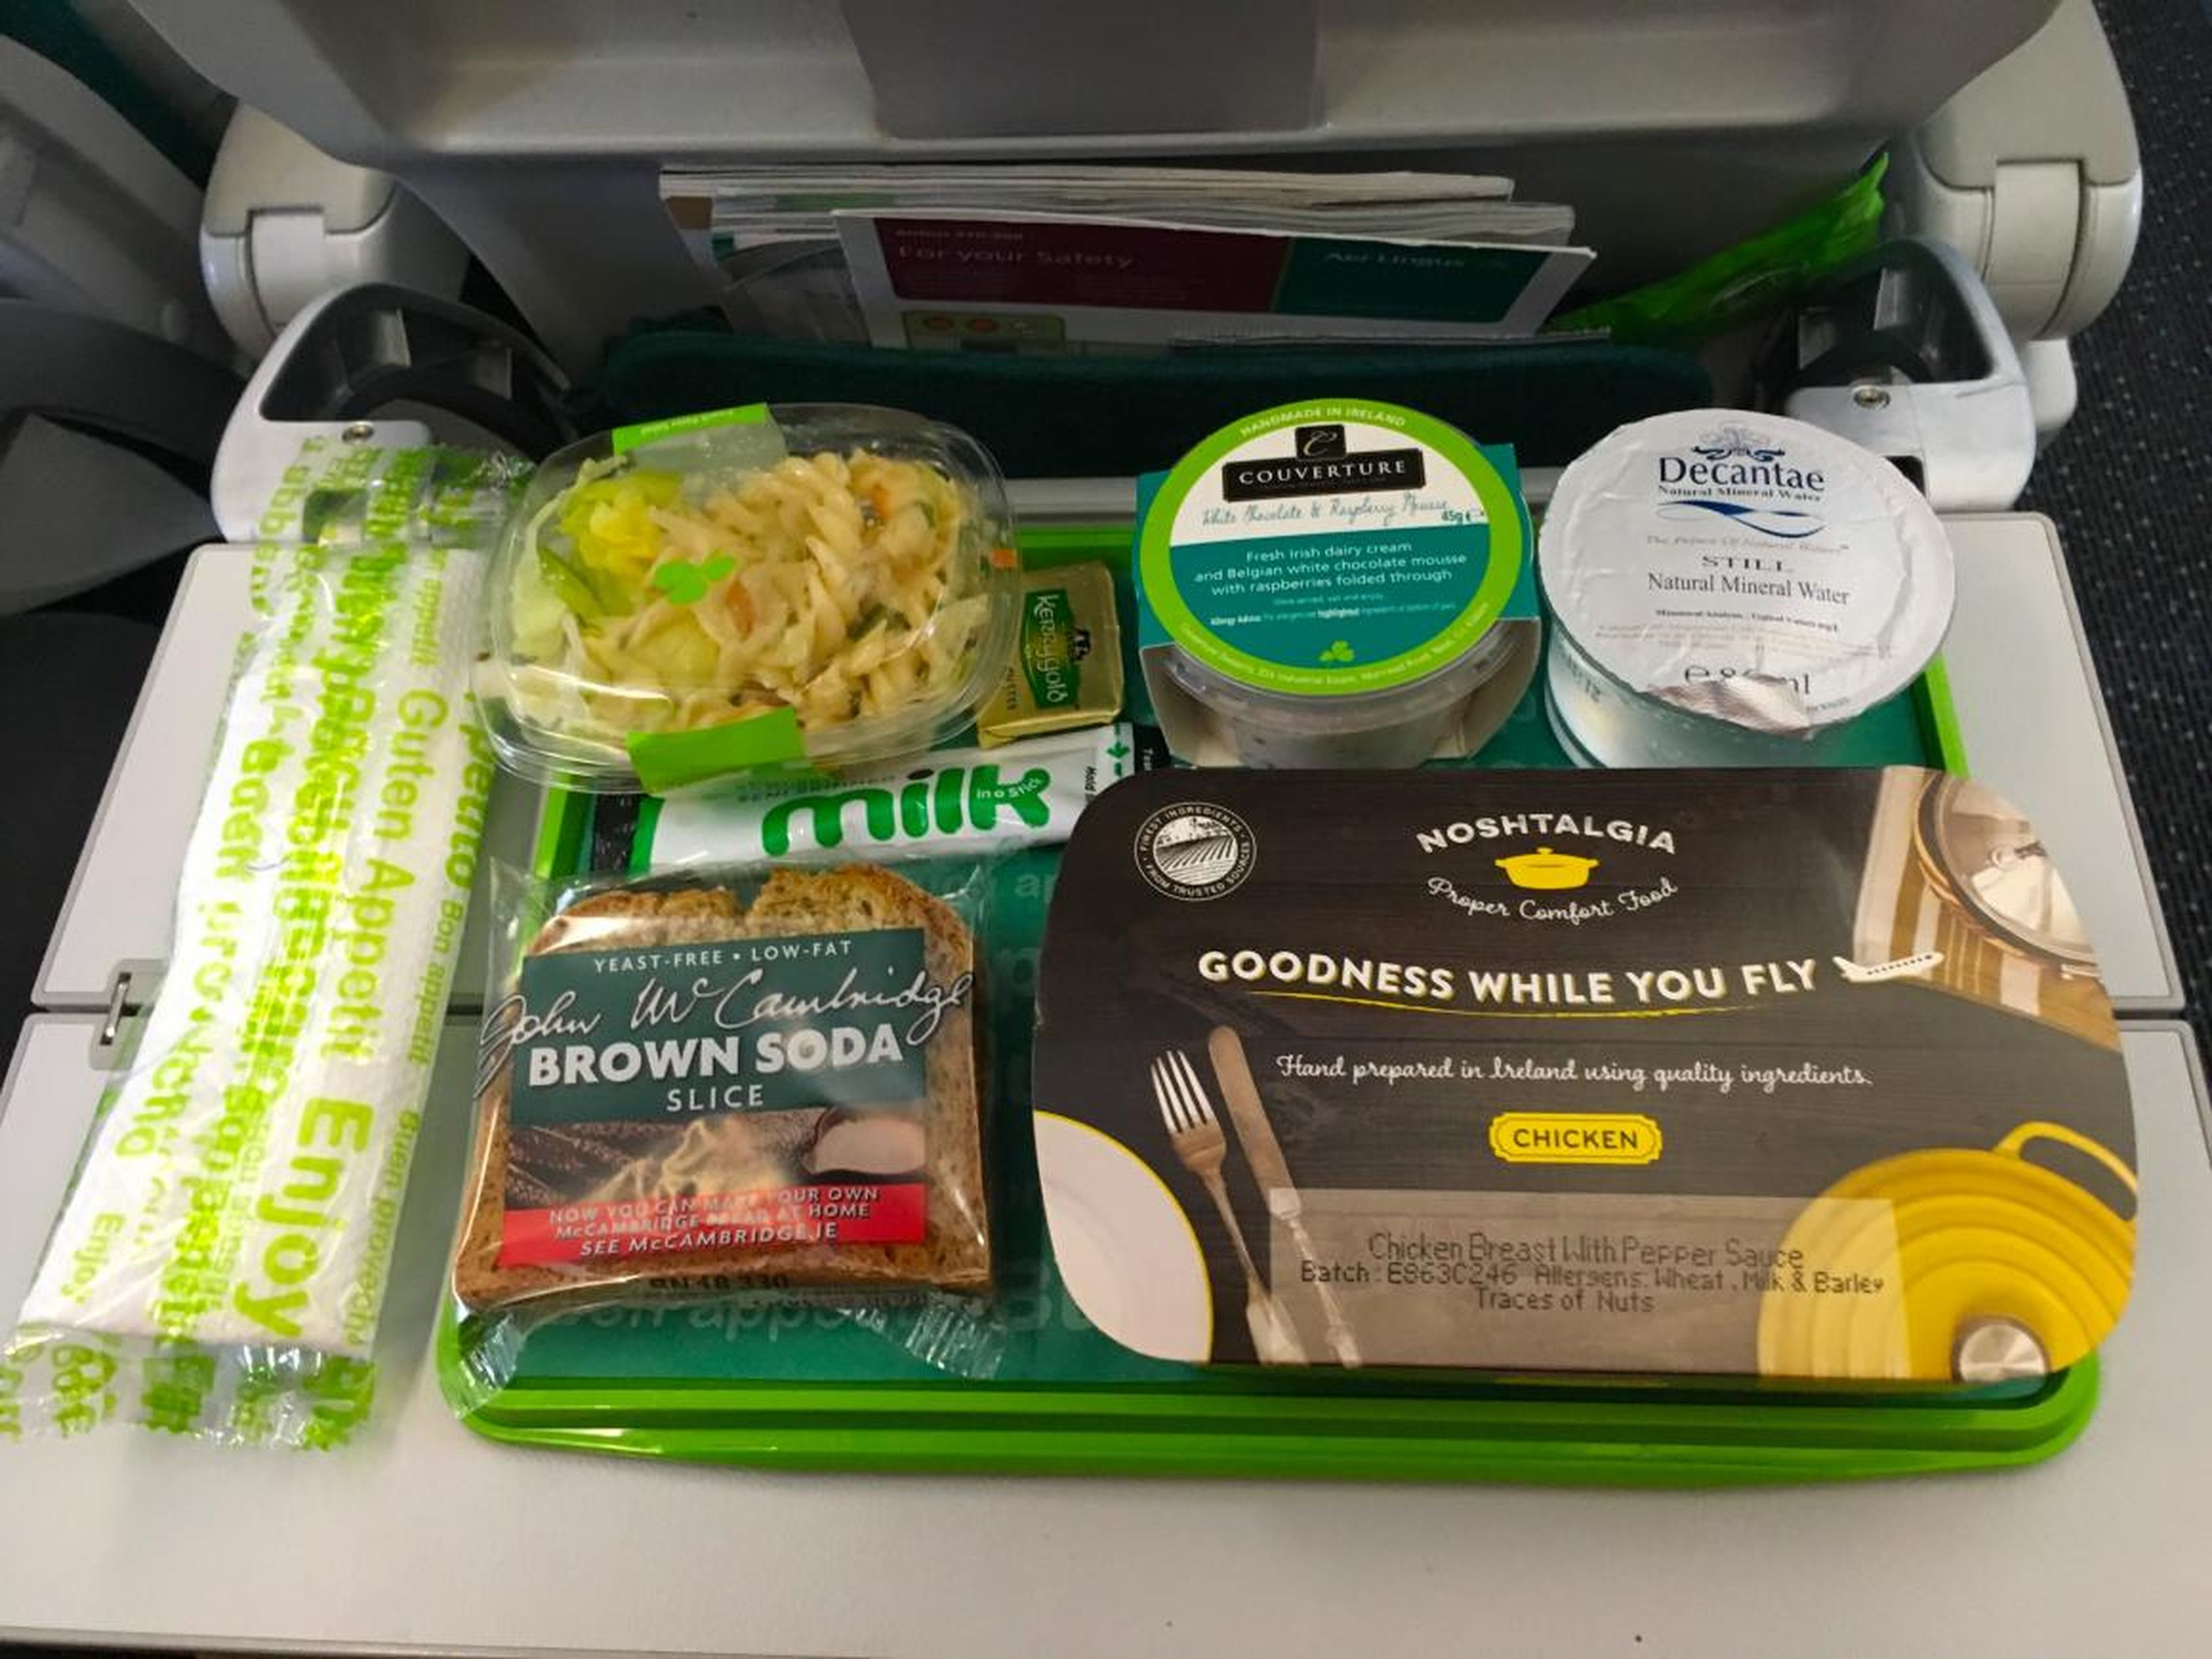 Today, in-flight meals are usually reserved for international long haul flights.